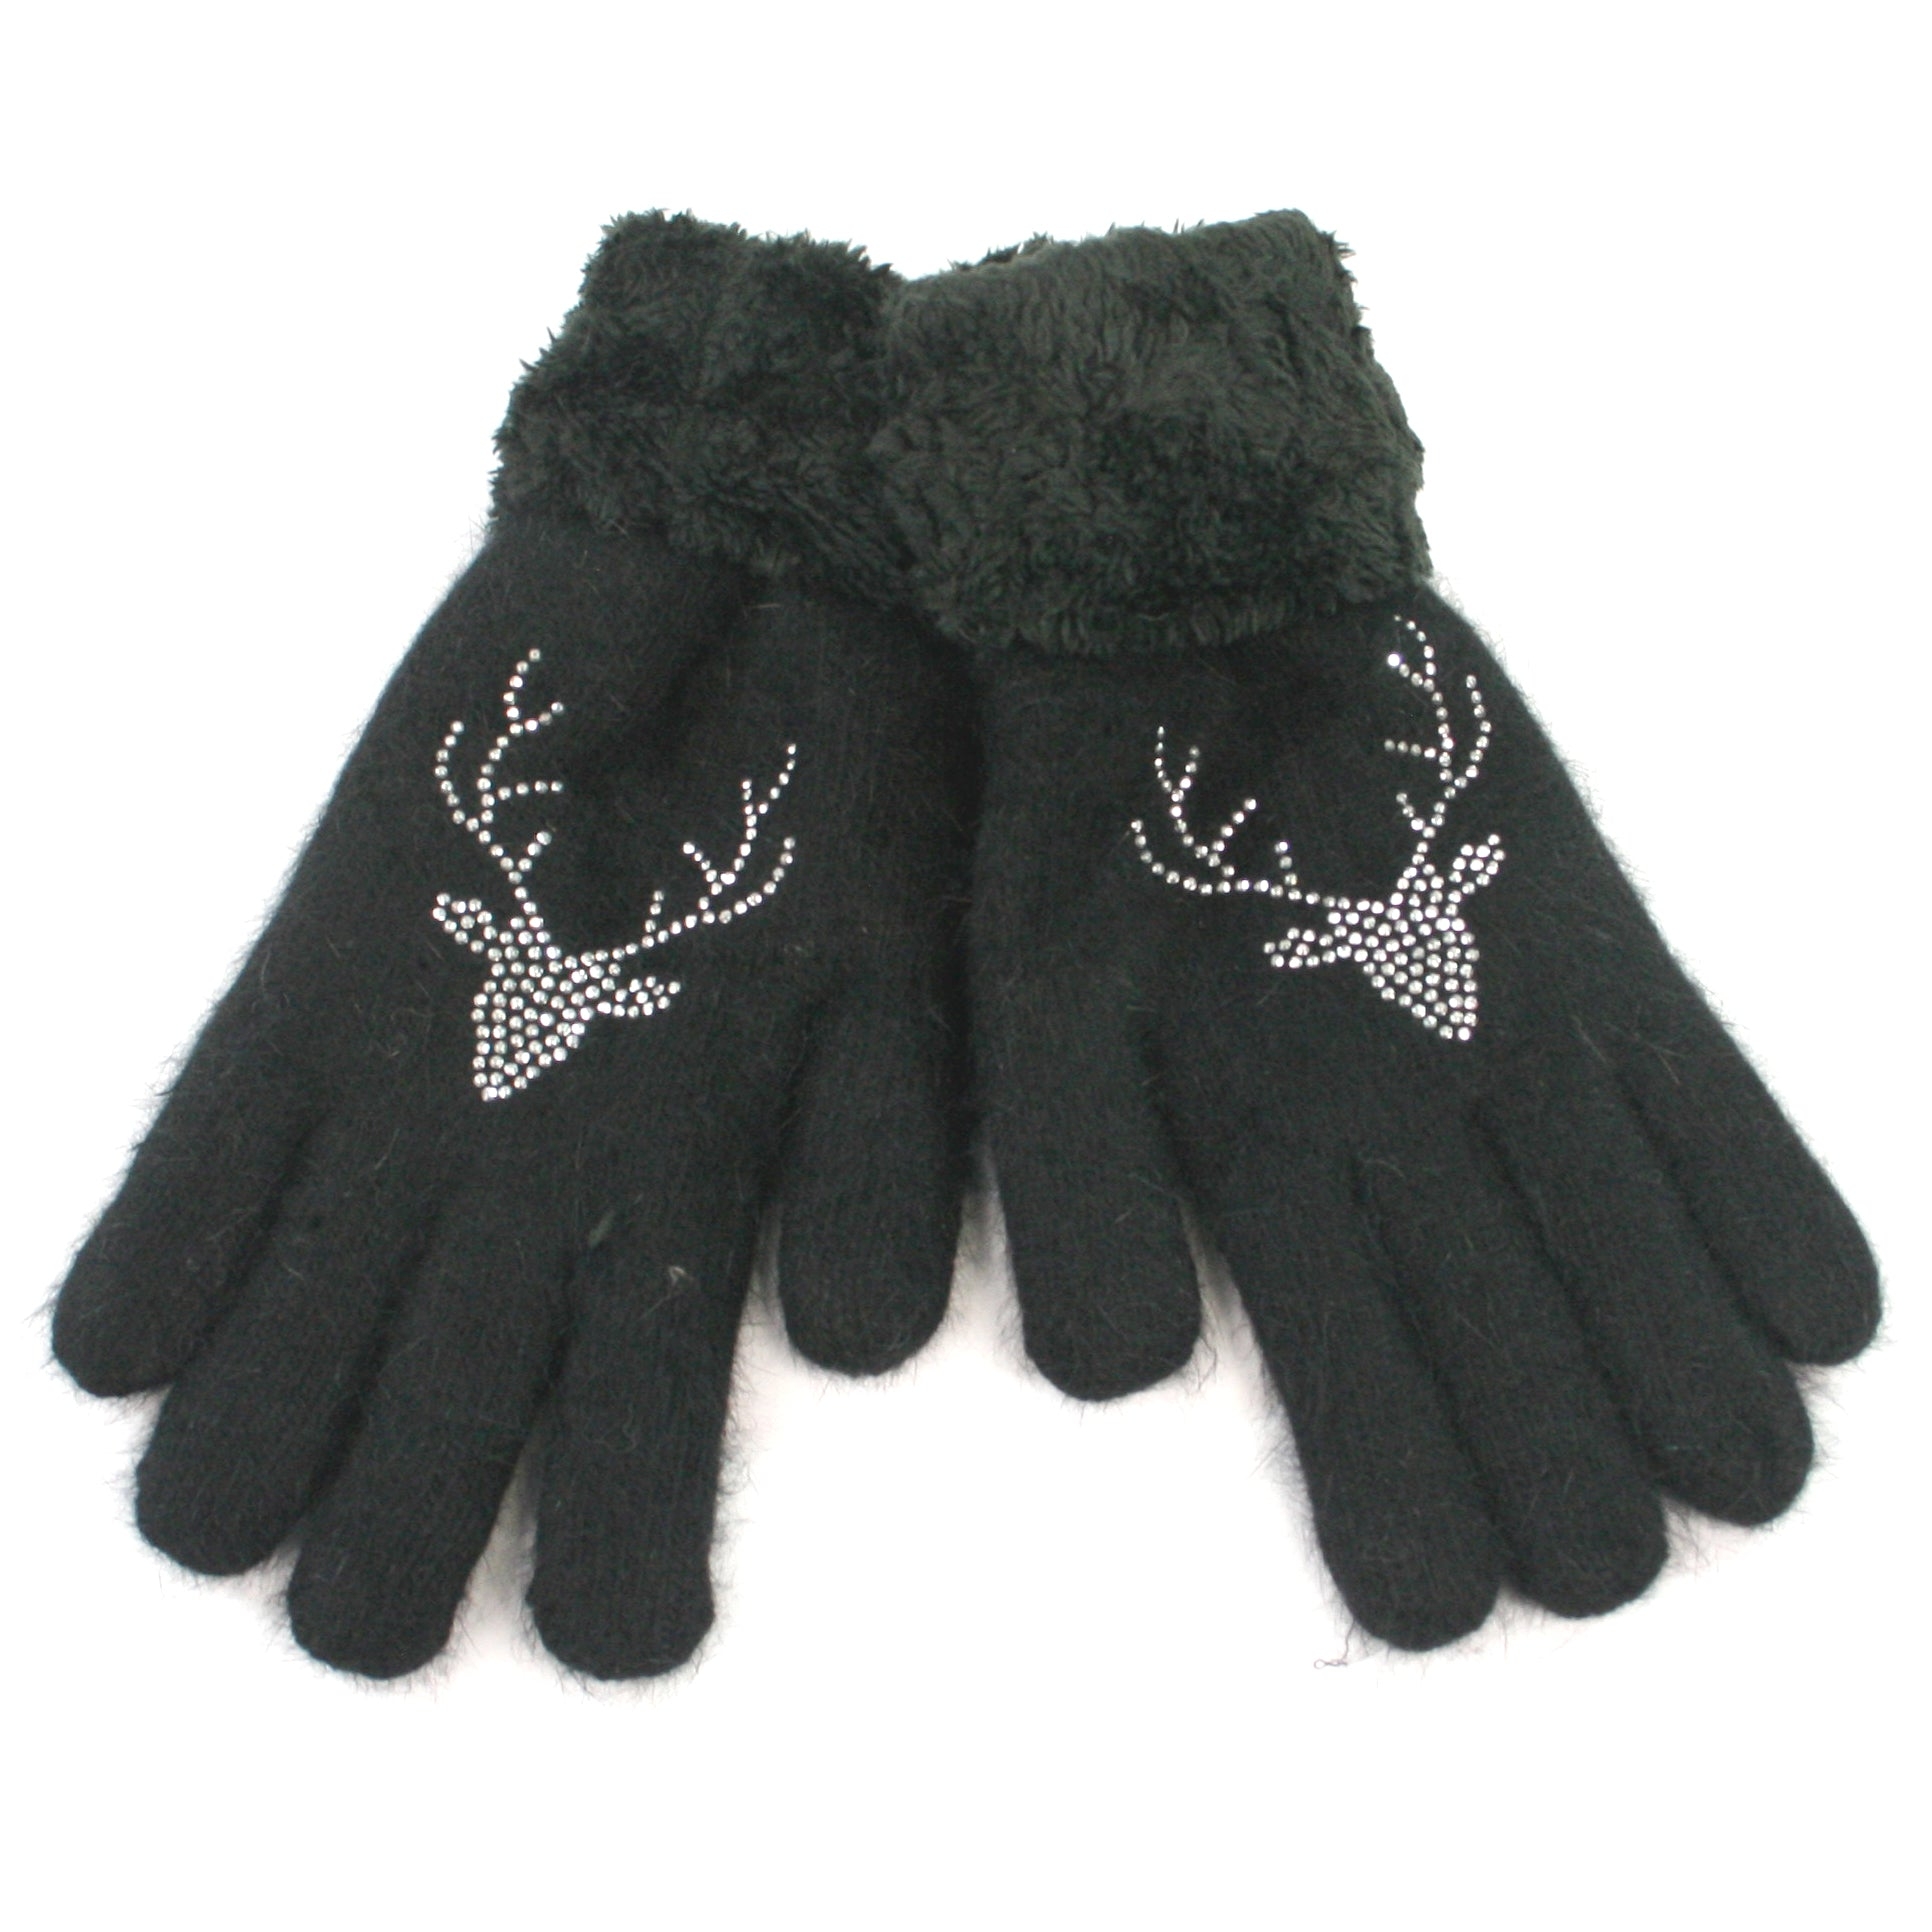 Fluffy Stag Gloves with Faux Fur Lining Black – The Scarf Giraffe